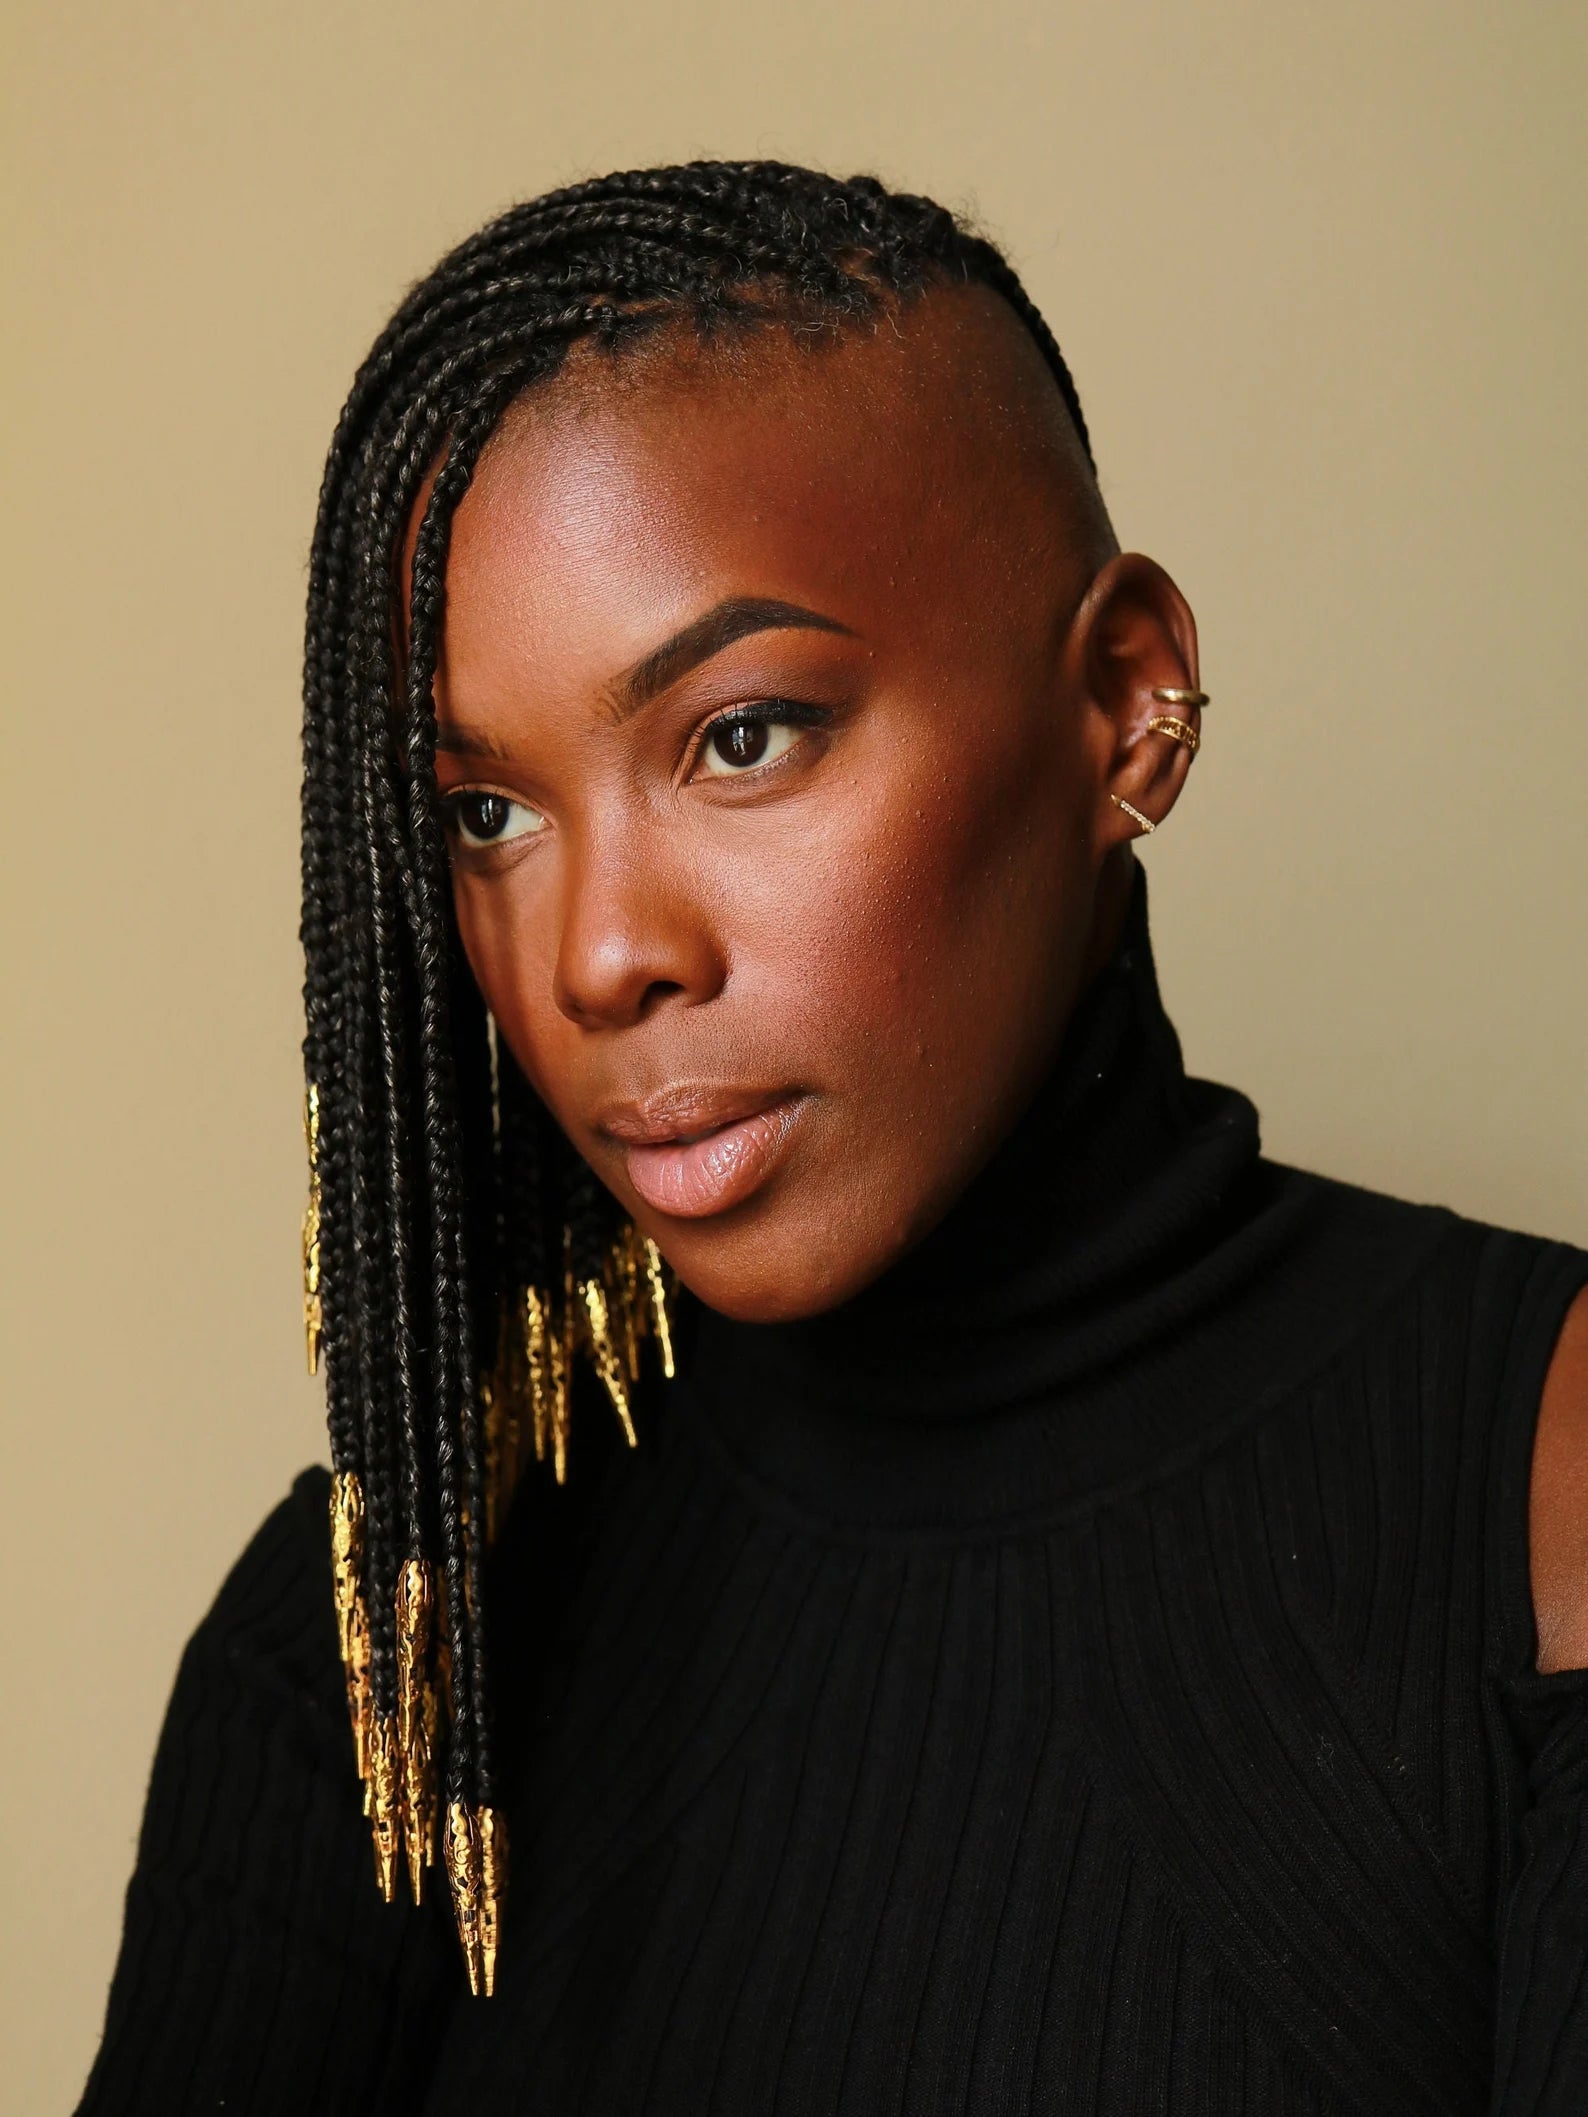 model wearing gold loc beads in their hair